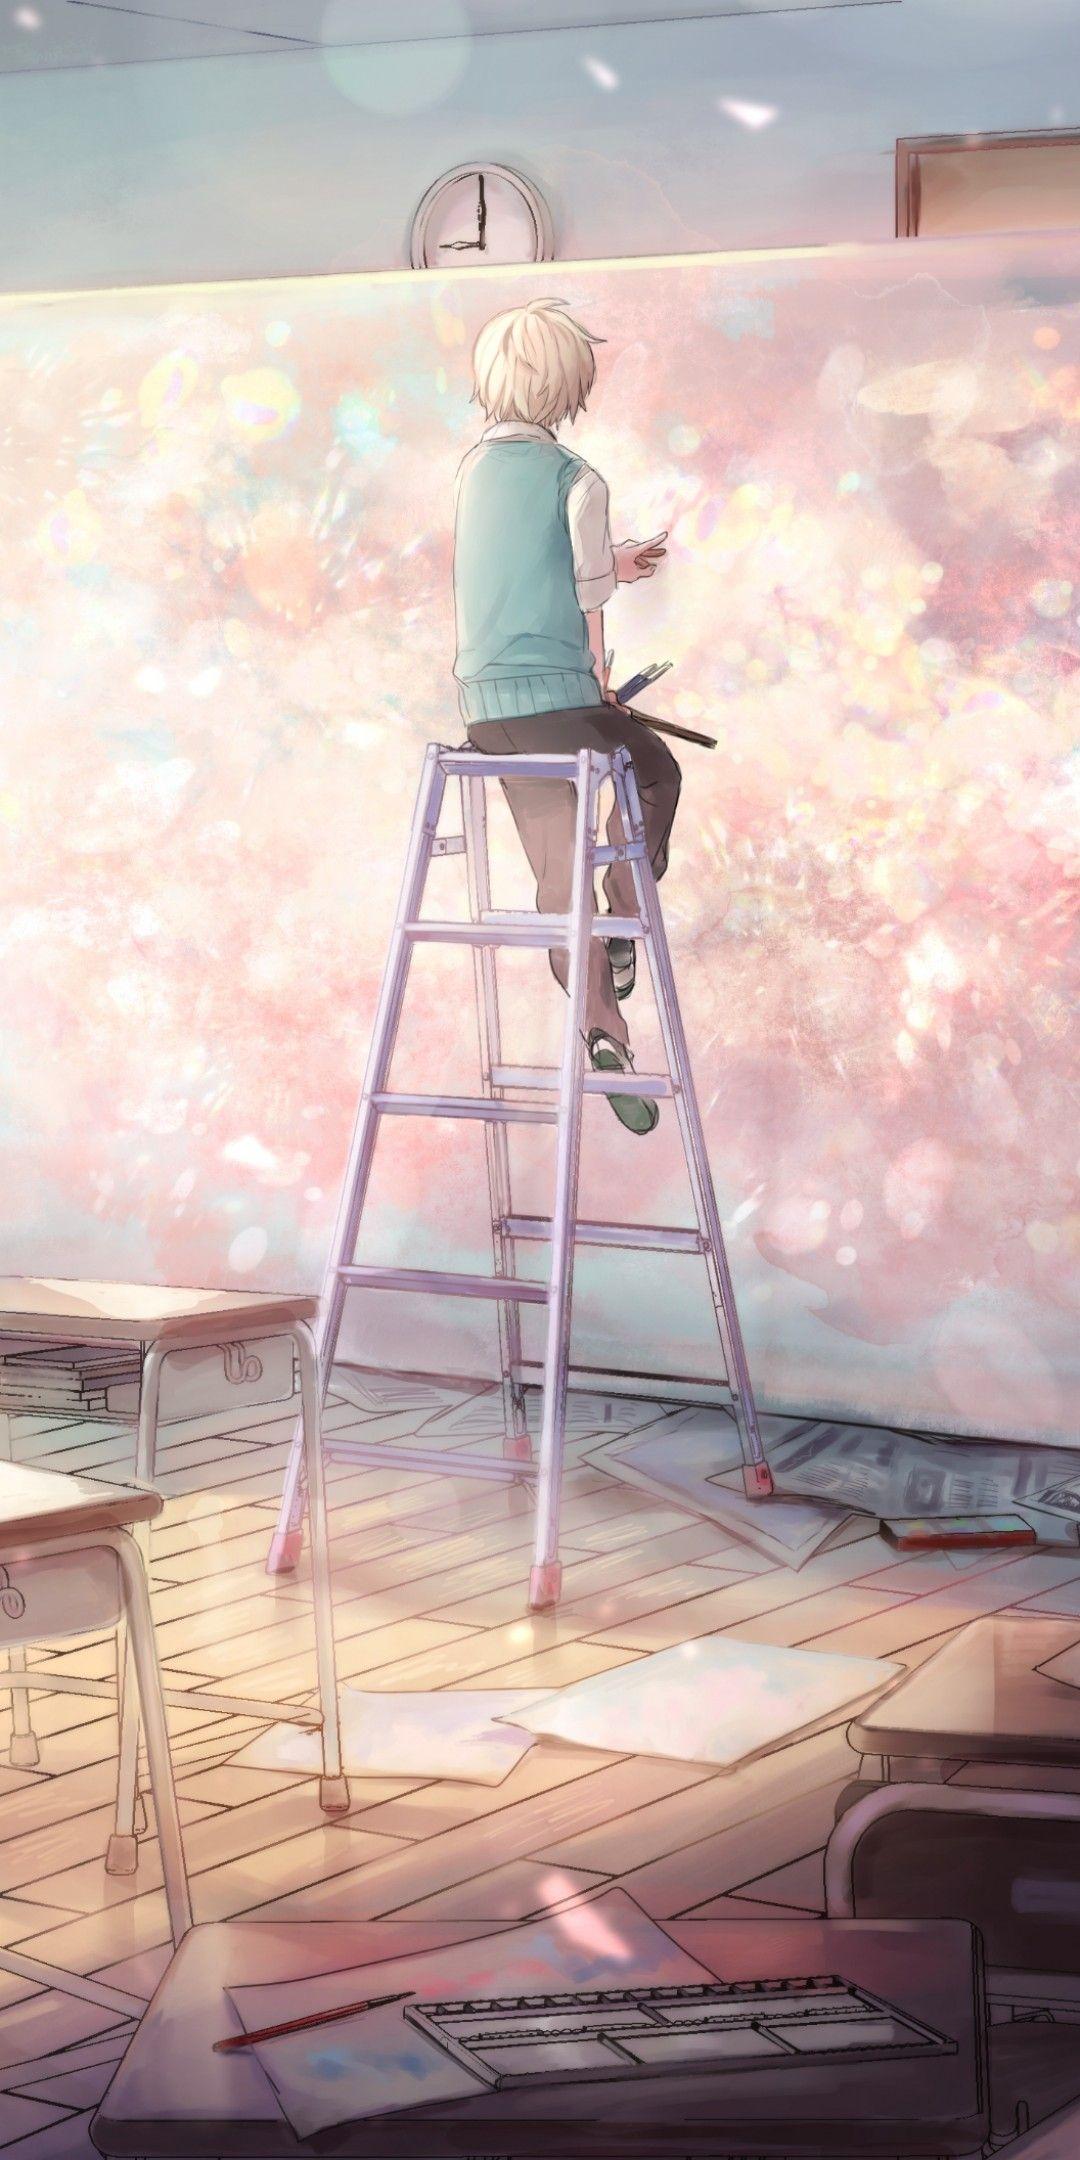 Download 1080x2160 Anime Boy, Classroom, Painting, Ladder Wallpaper